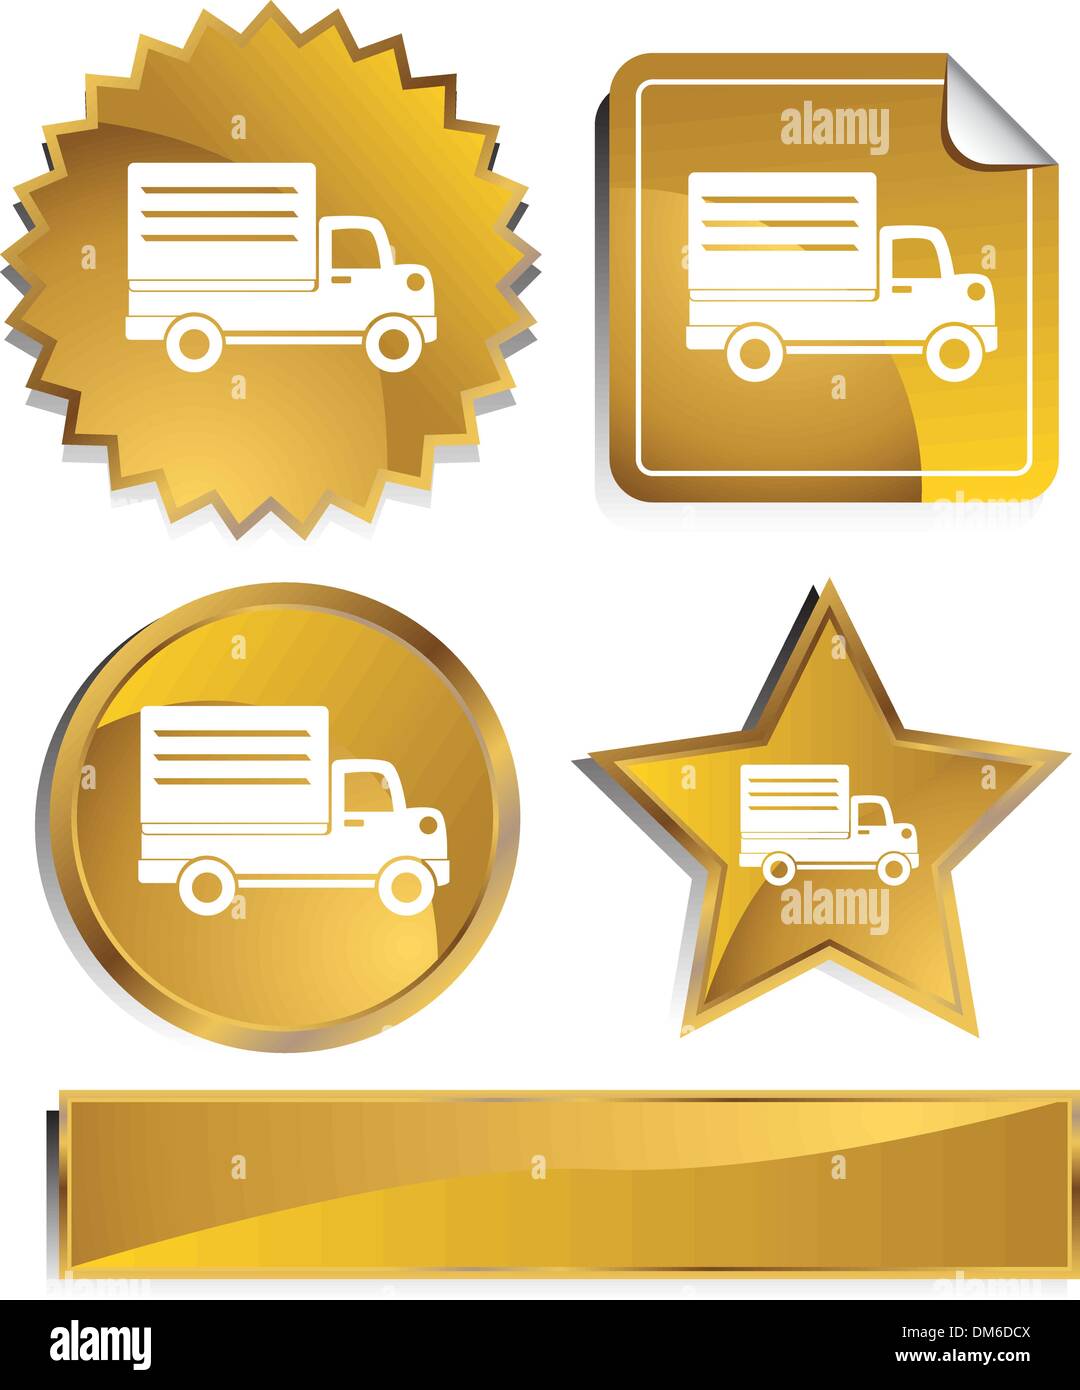 Delivery Truck Stock Vector